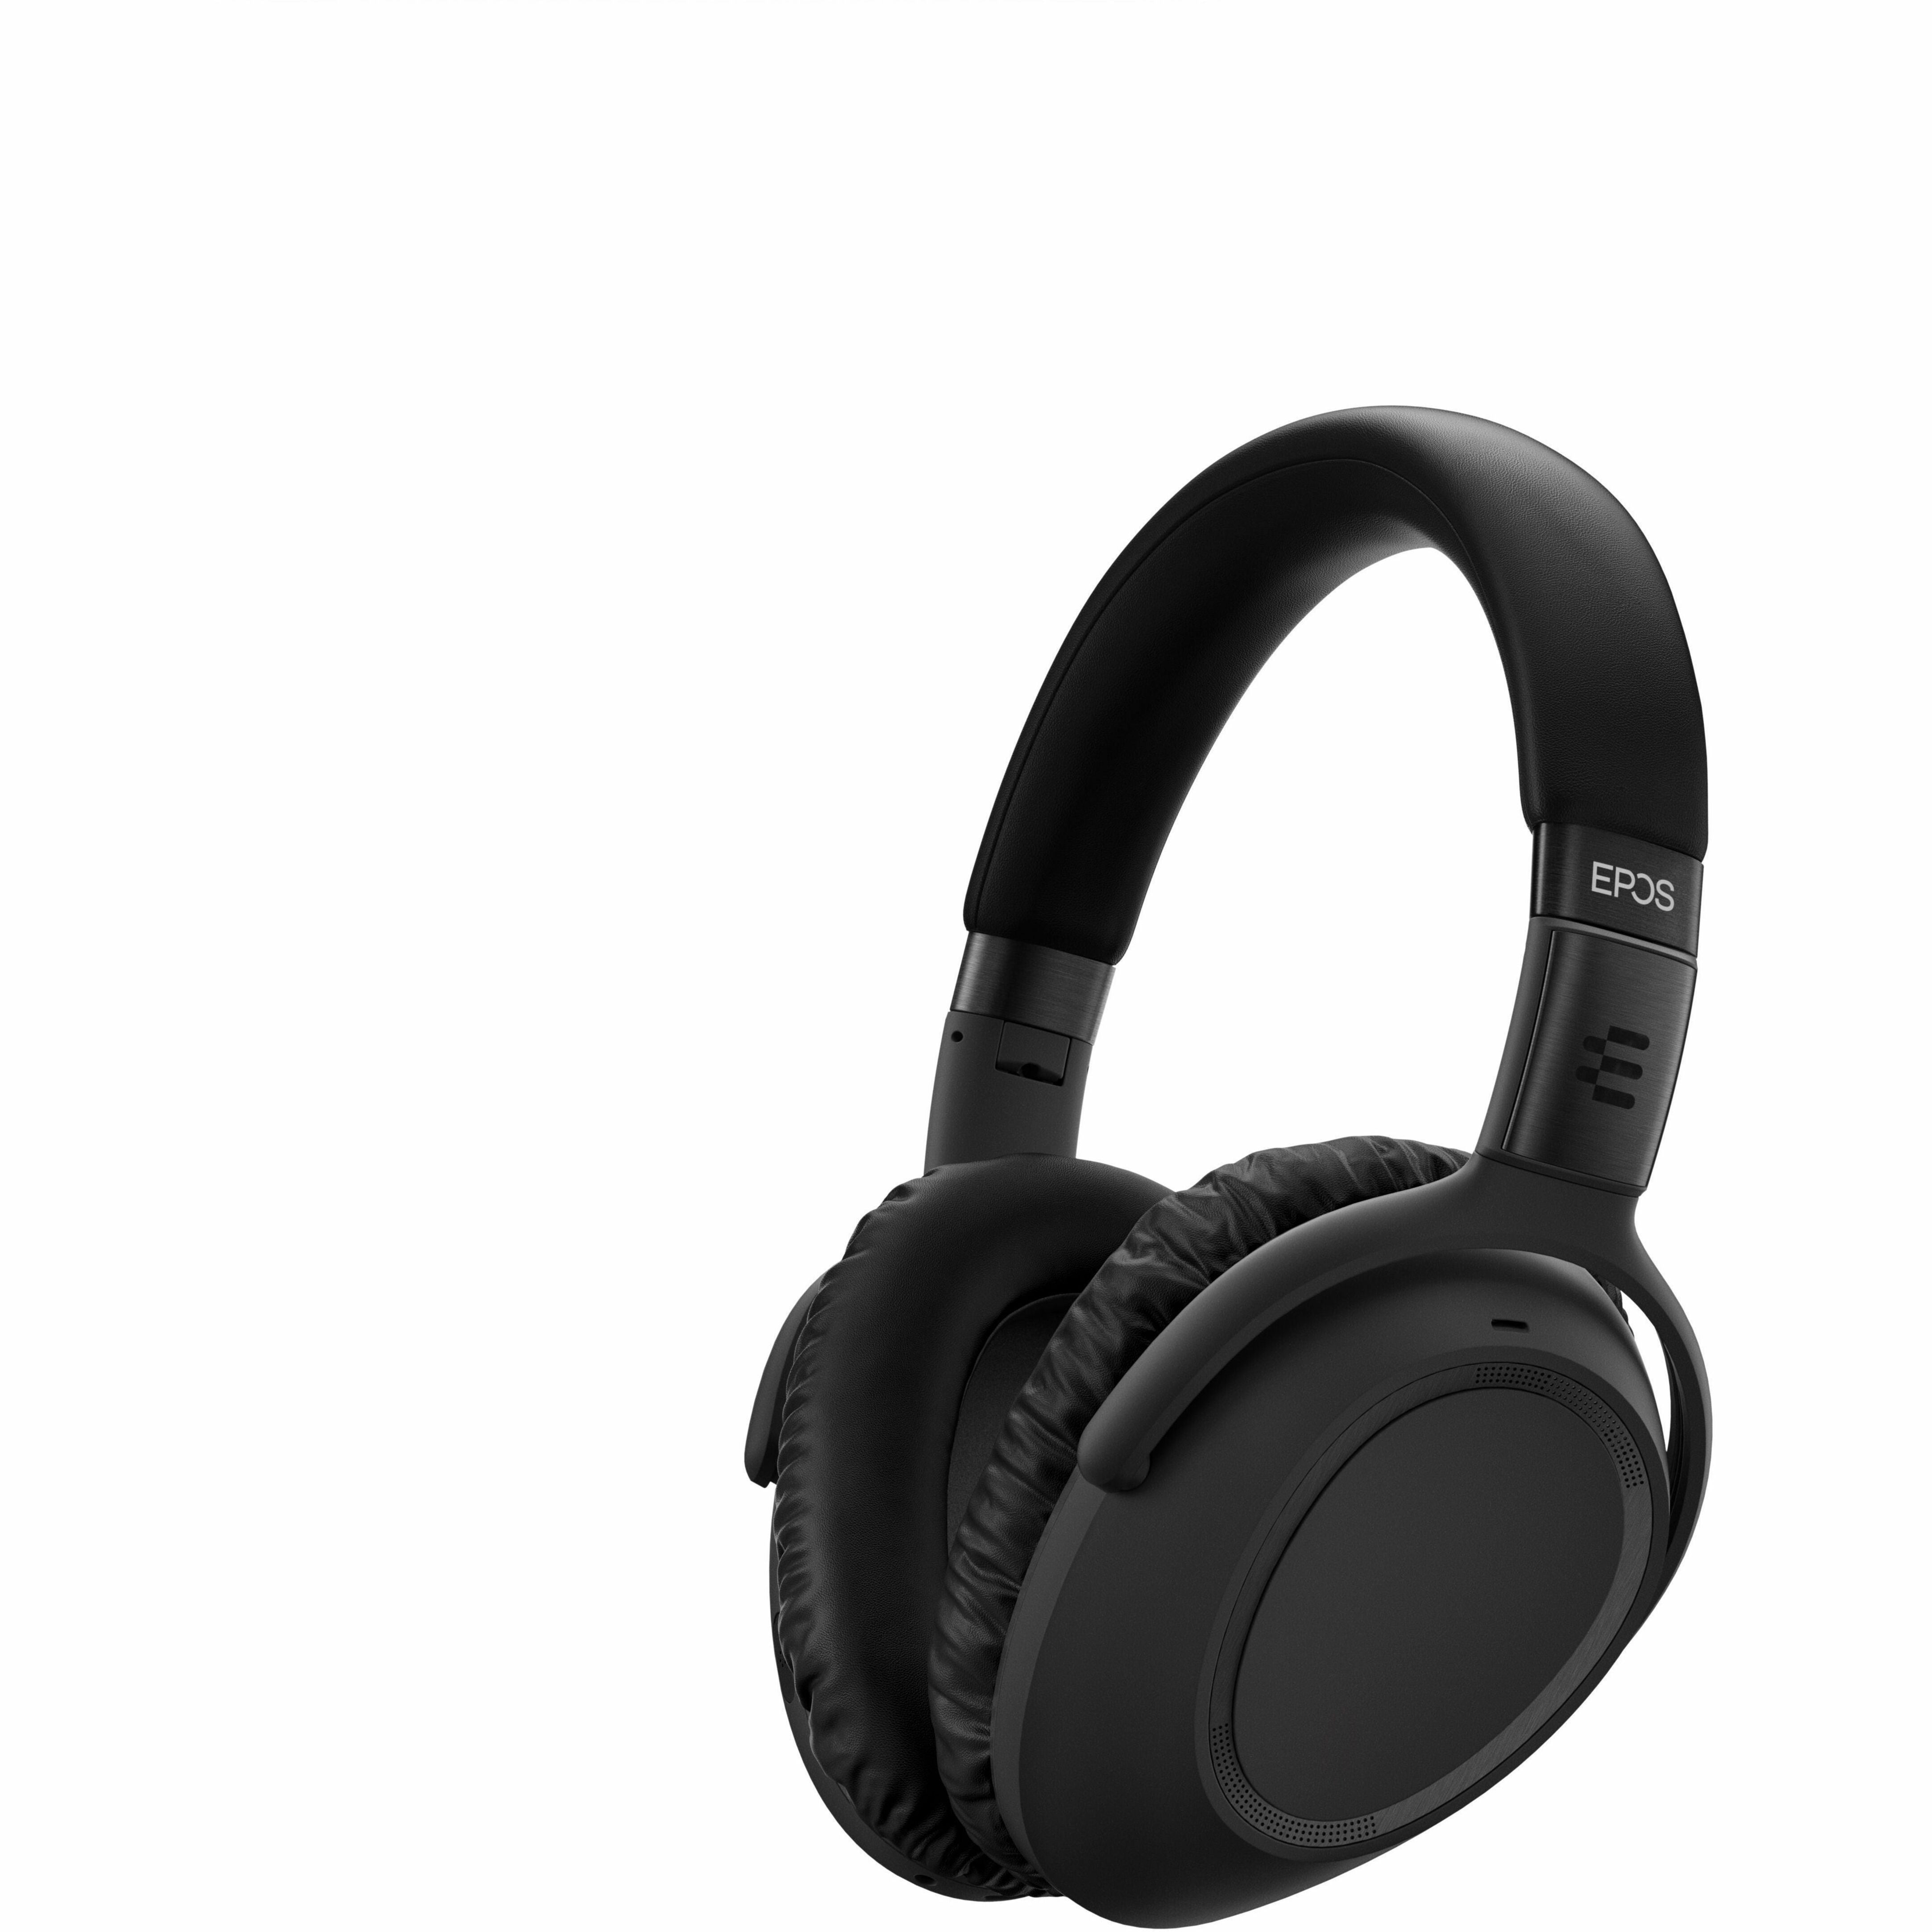 EPOS | SENNHEISER 1001004 ADAPT 661 Headset, Binaural Over-the-ear, 2 Year Warranty, Noise Cancelling, Music and Office Use